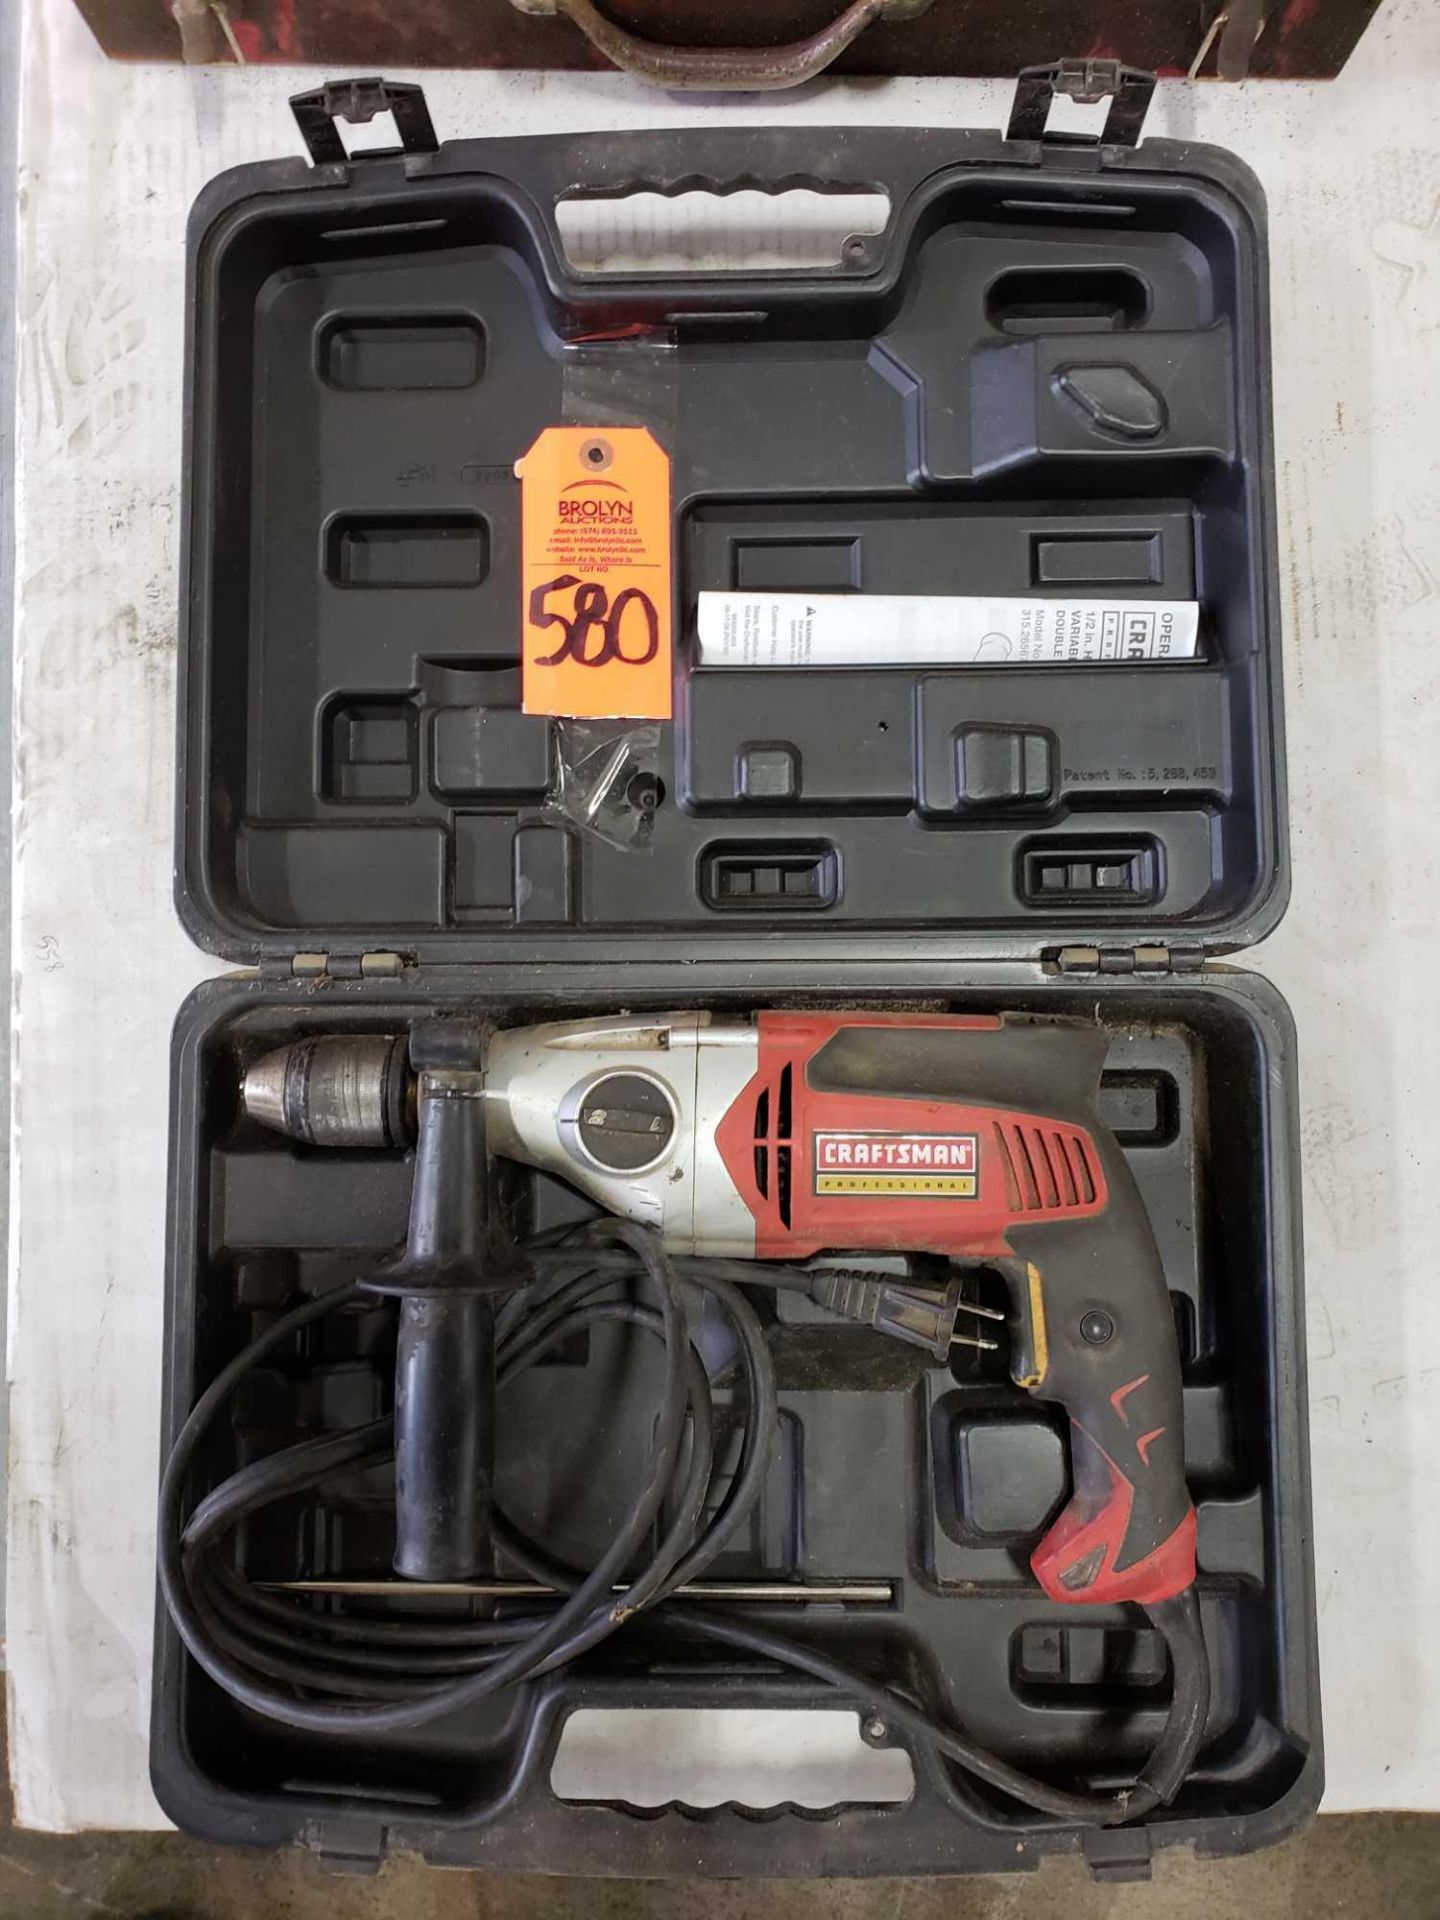 Craftsman Professional Drill with case. Single phase, 110v.